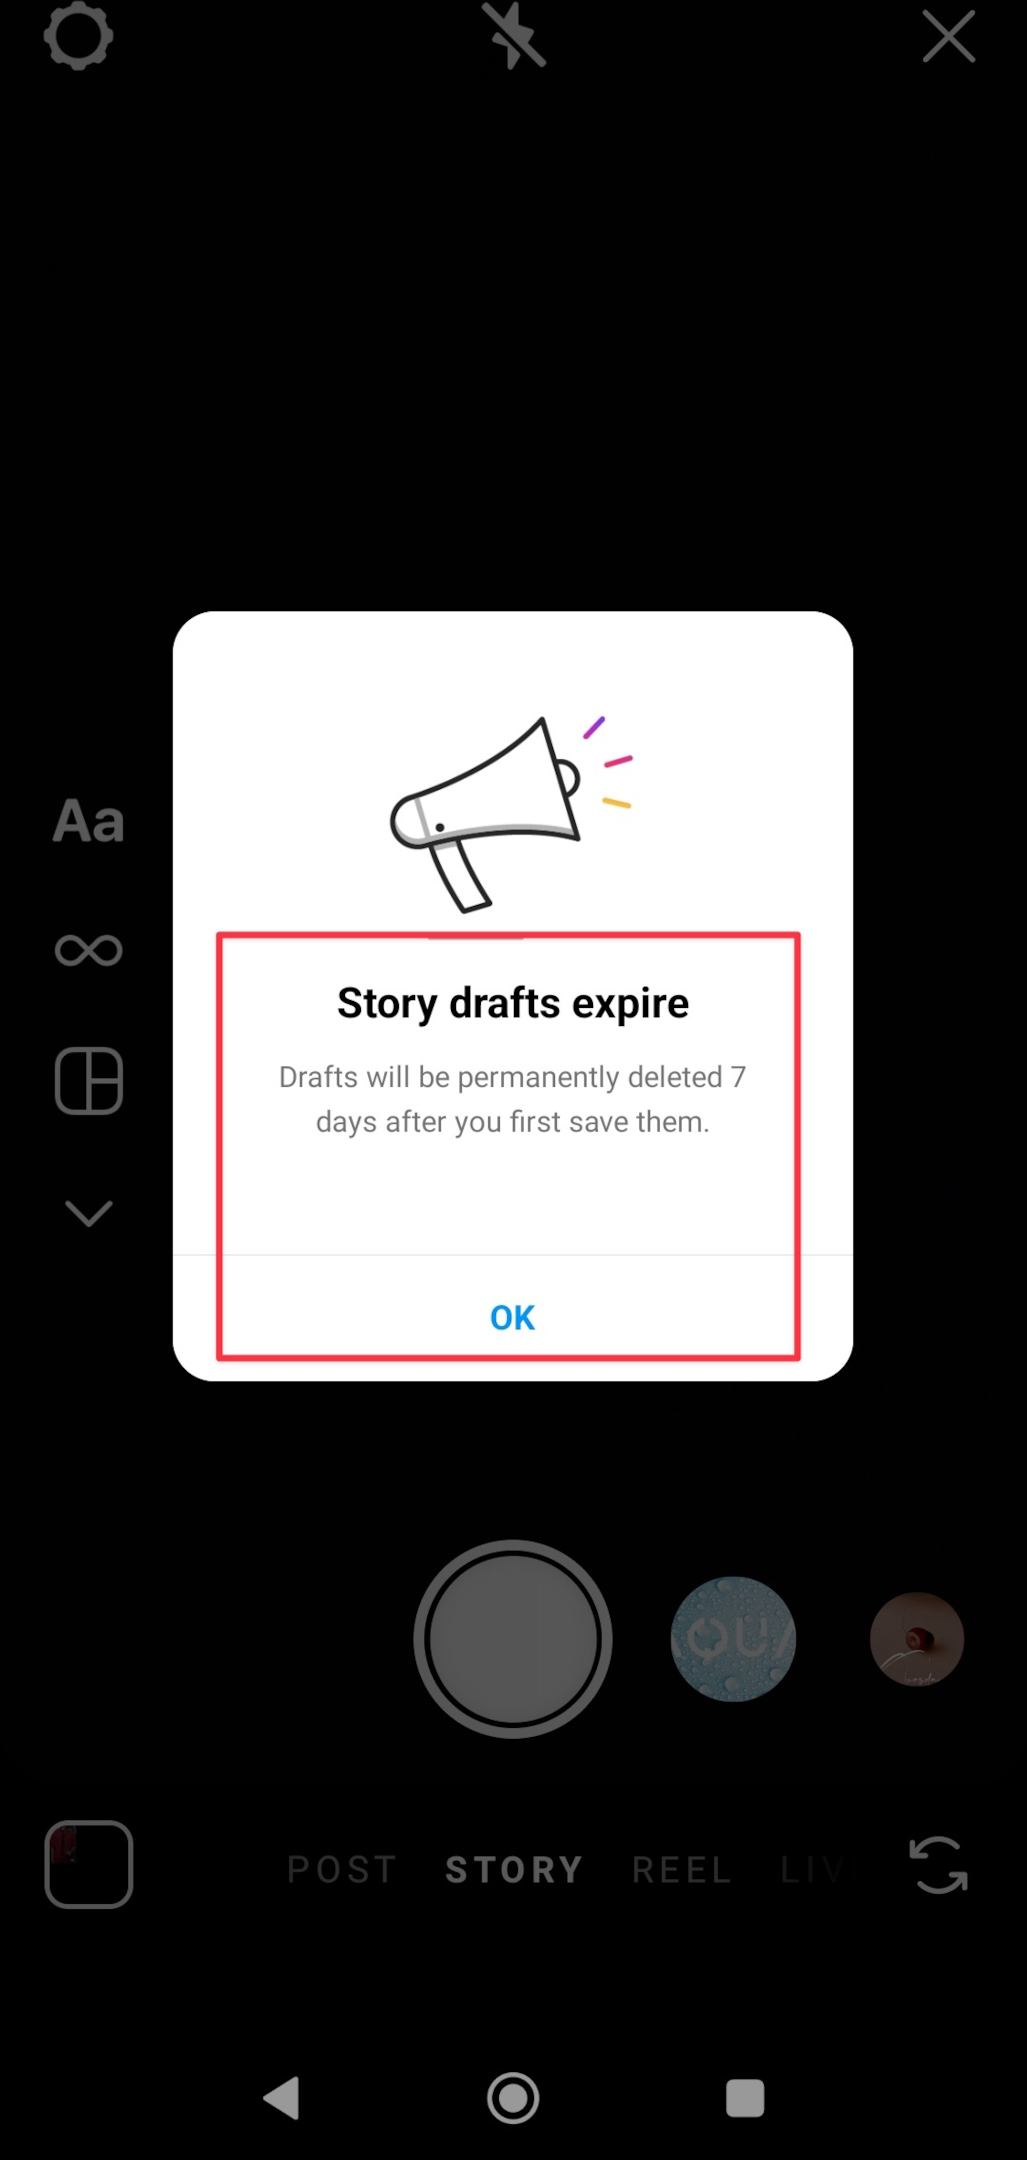 Remote.tools shows evidence of an Instagram story remaining in drafts for seven days, as reported by Social media today.